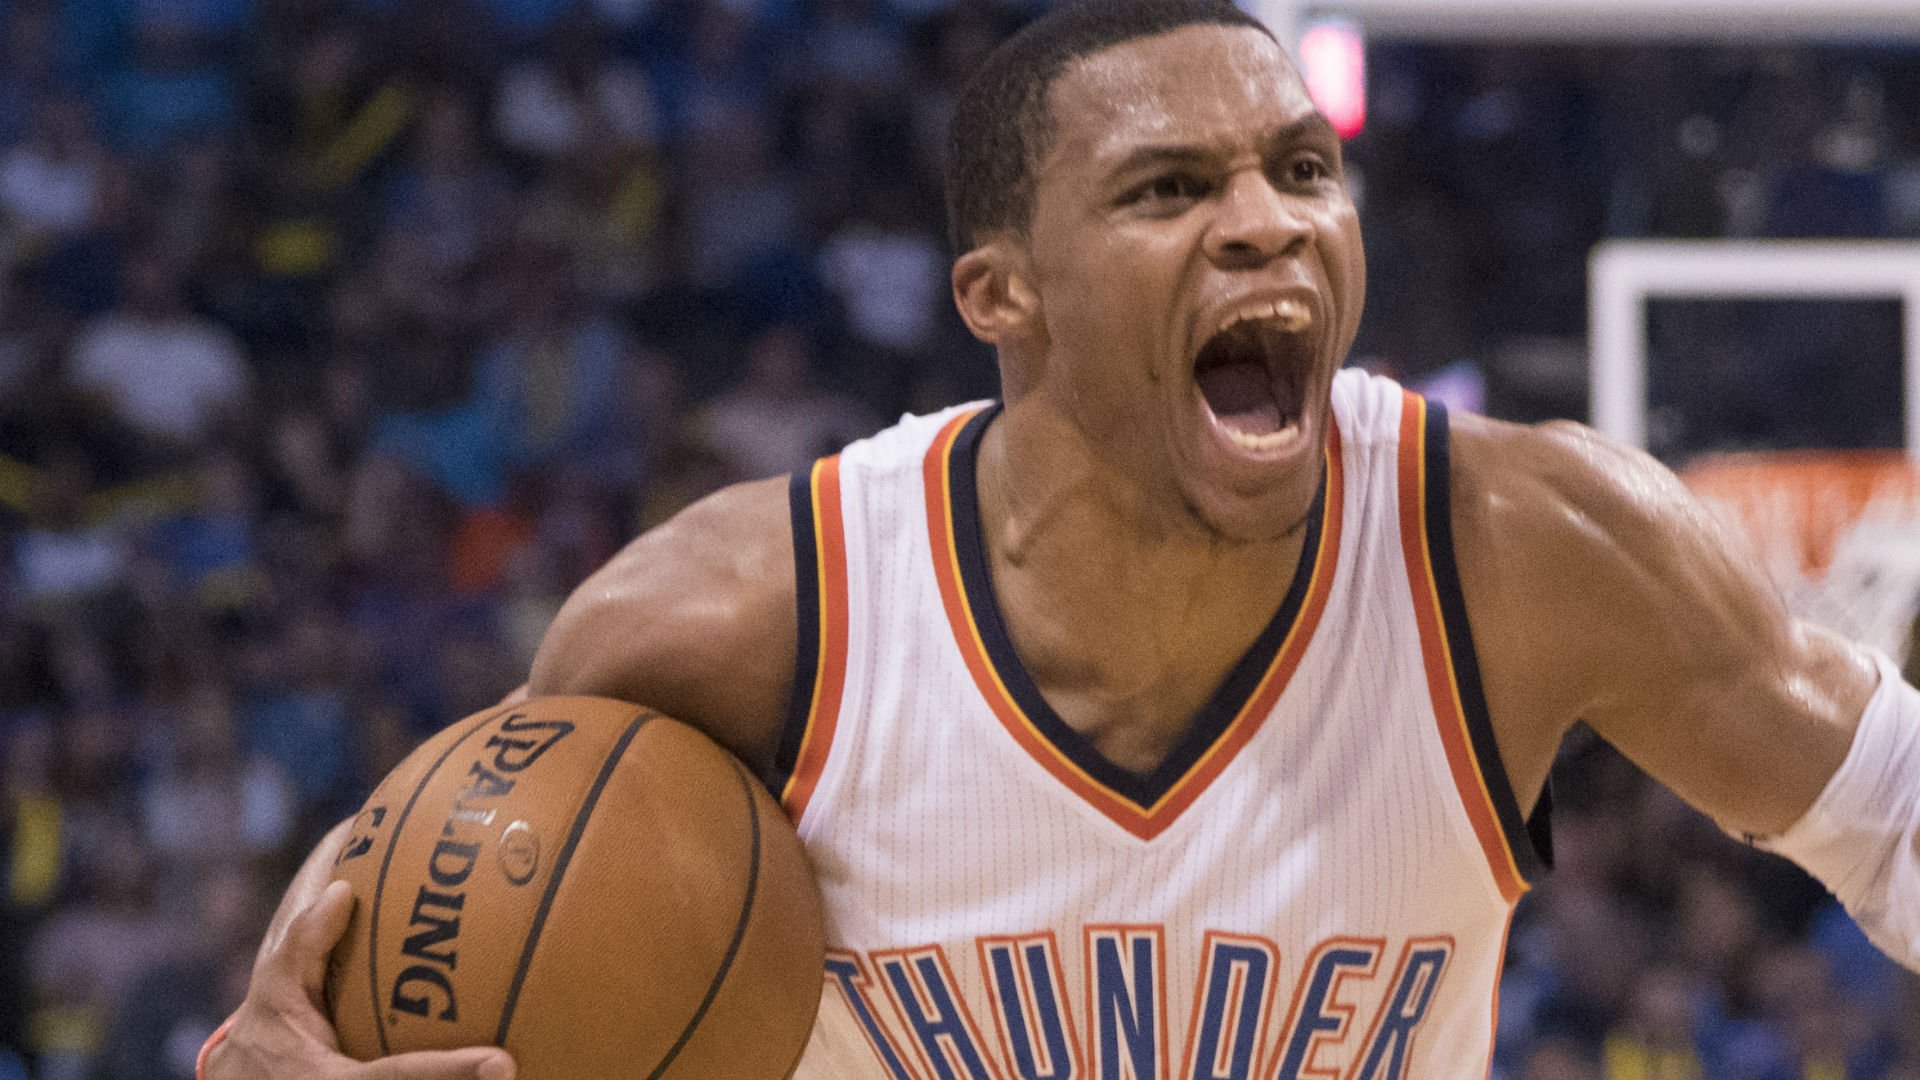 Russell Westbrook gets mad at media after Kevin Durant questions